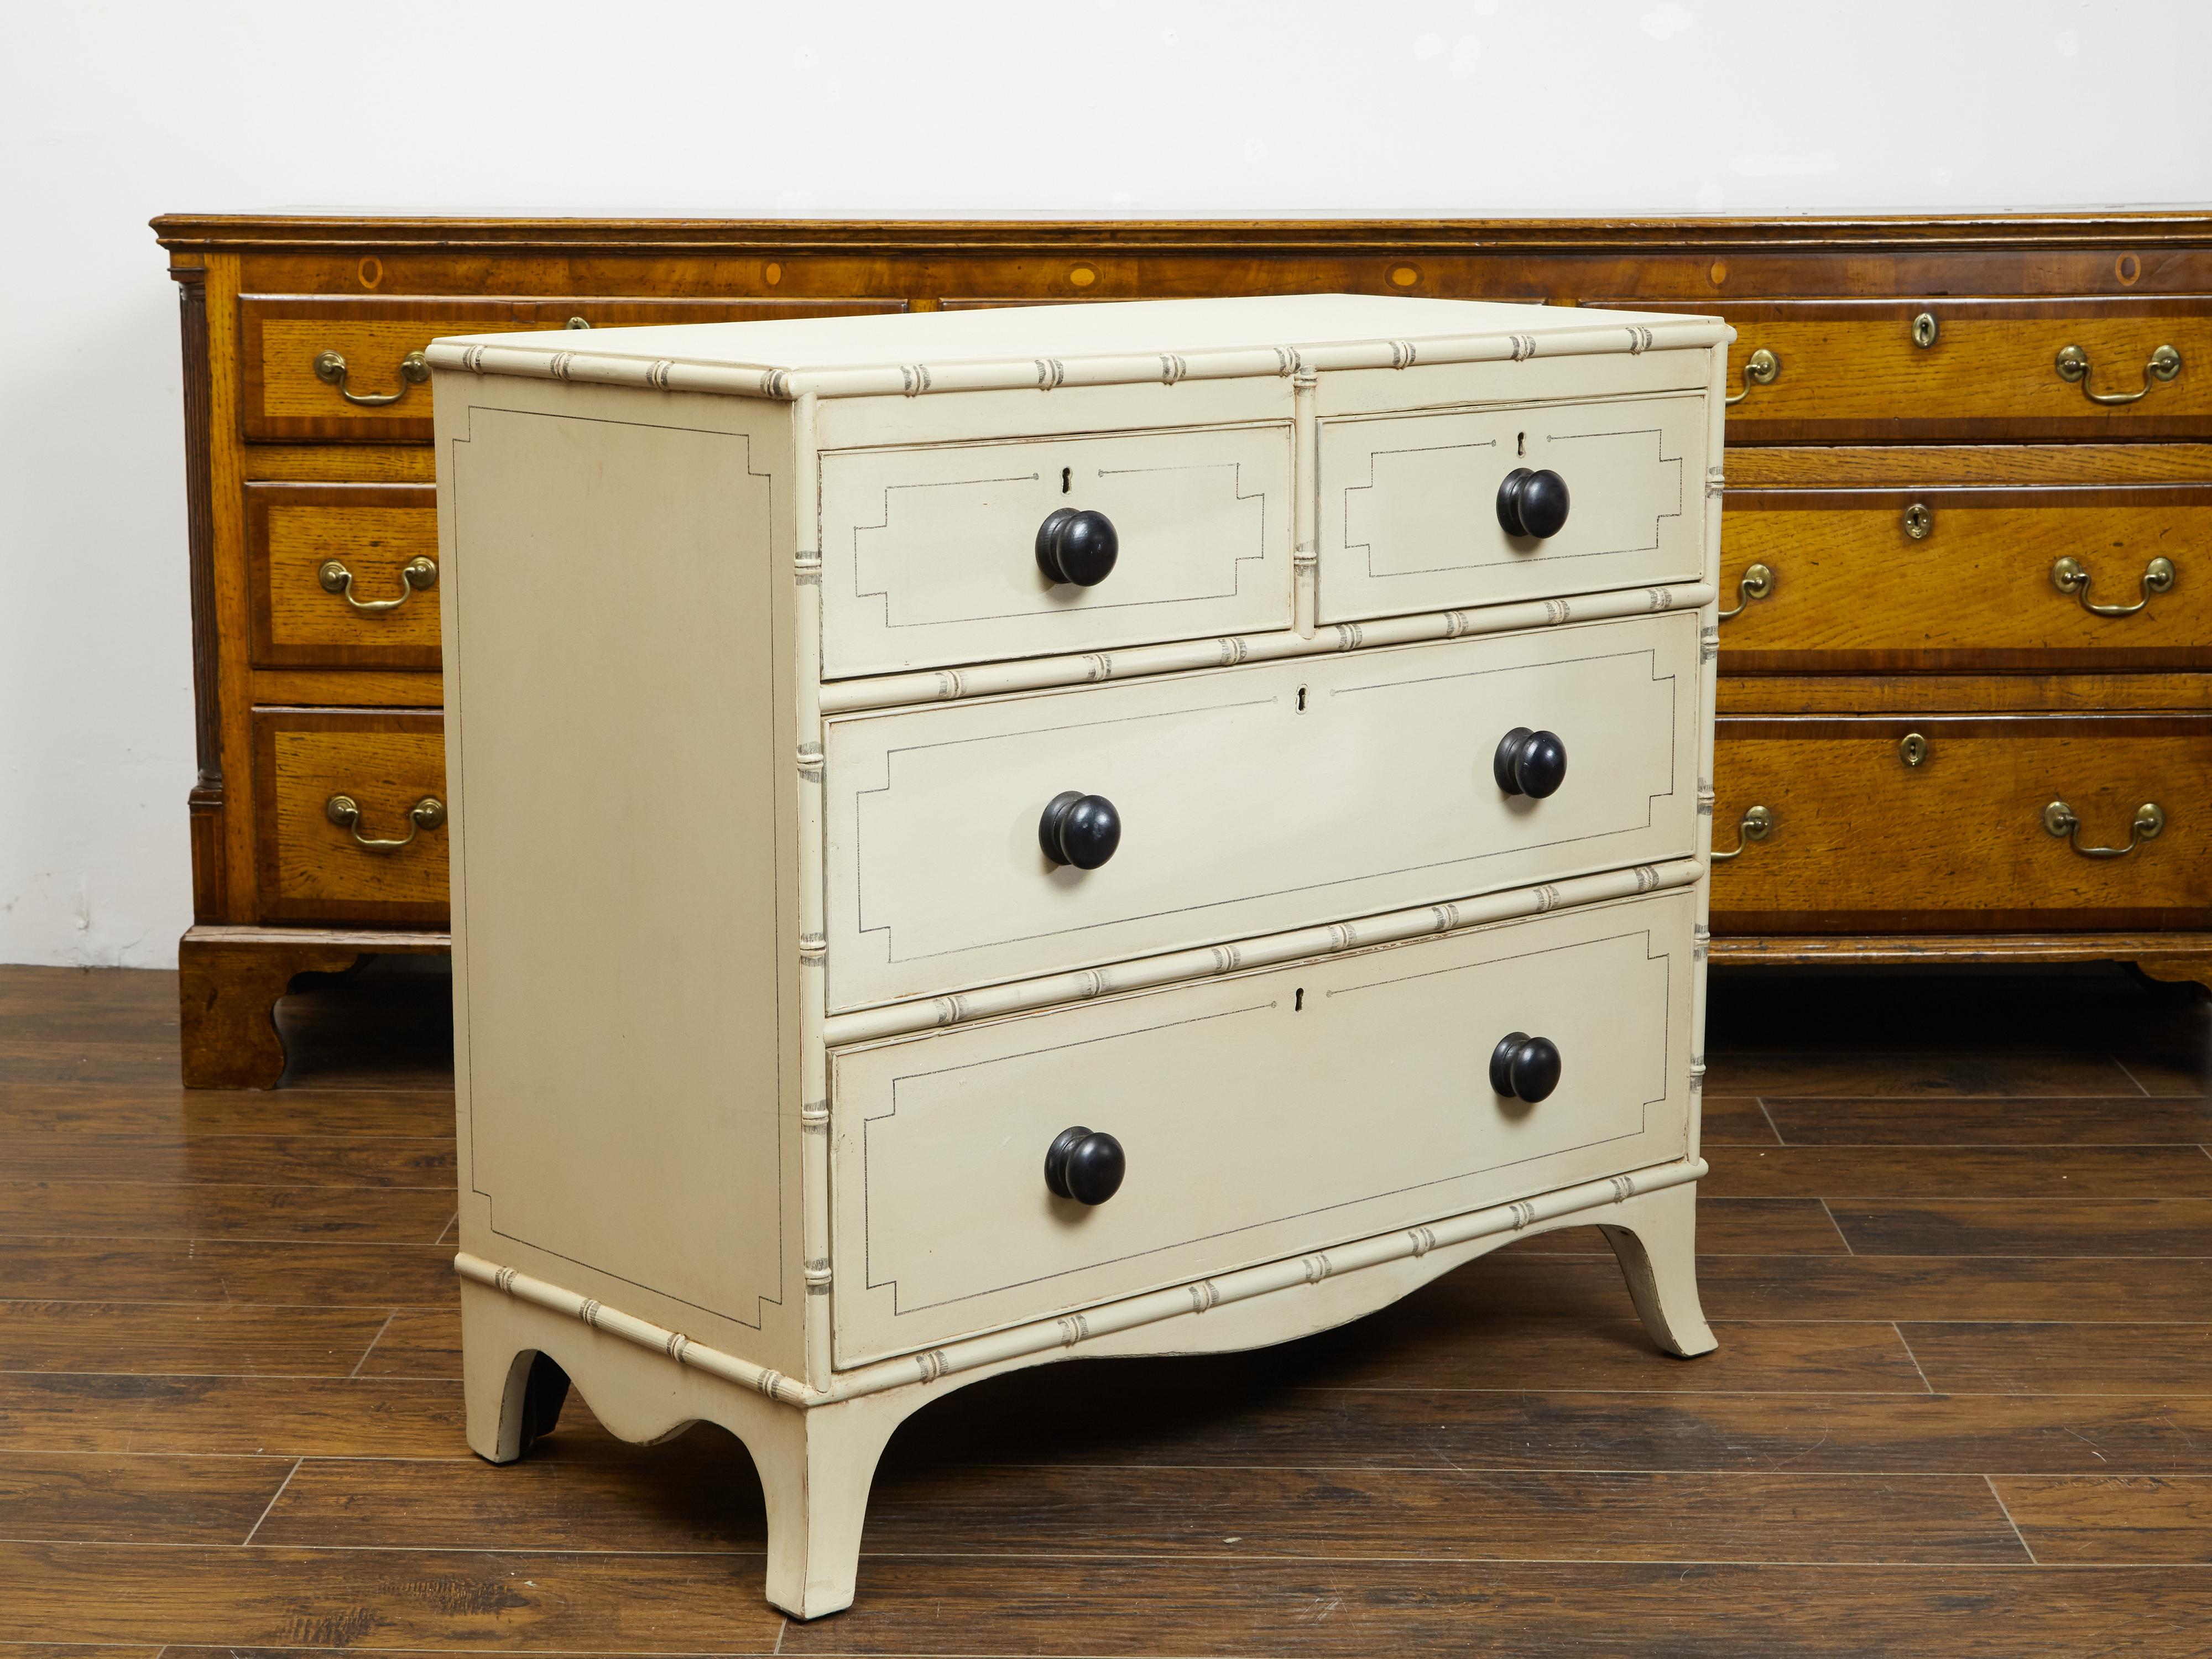 An English painted wood four-drawer chest from the late 19th century, with new paint. Created in England during the third quarter of the 19th century, this chest features a rectangular top with painted outline, sitting above four drawers (two small